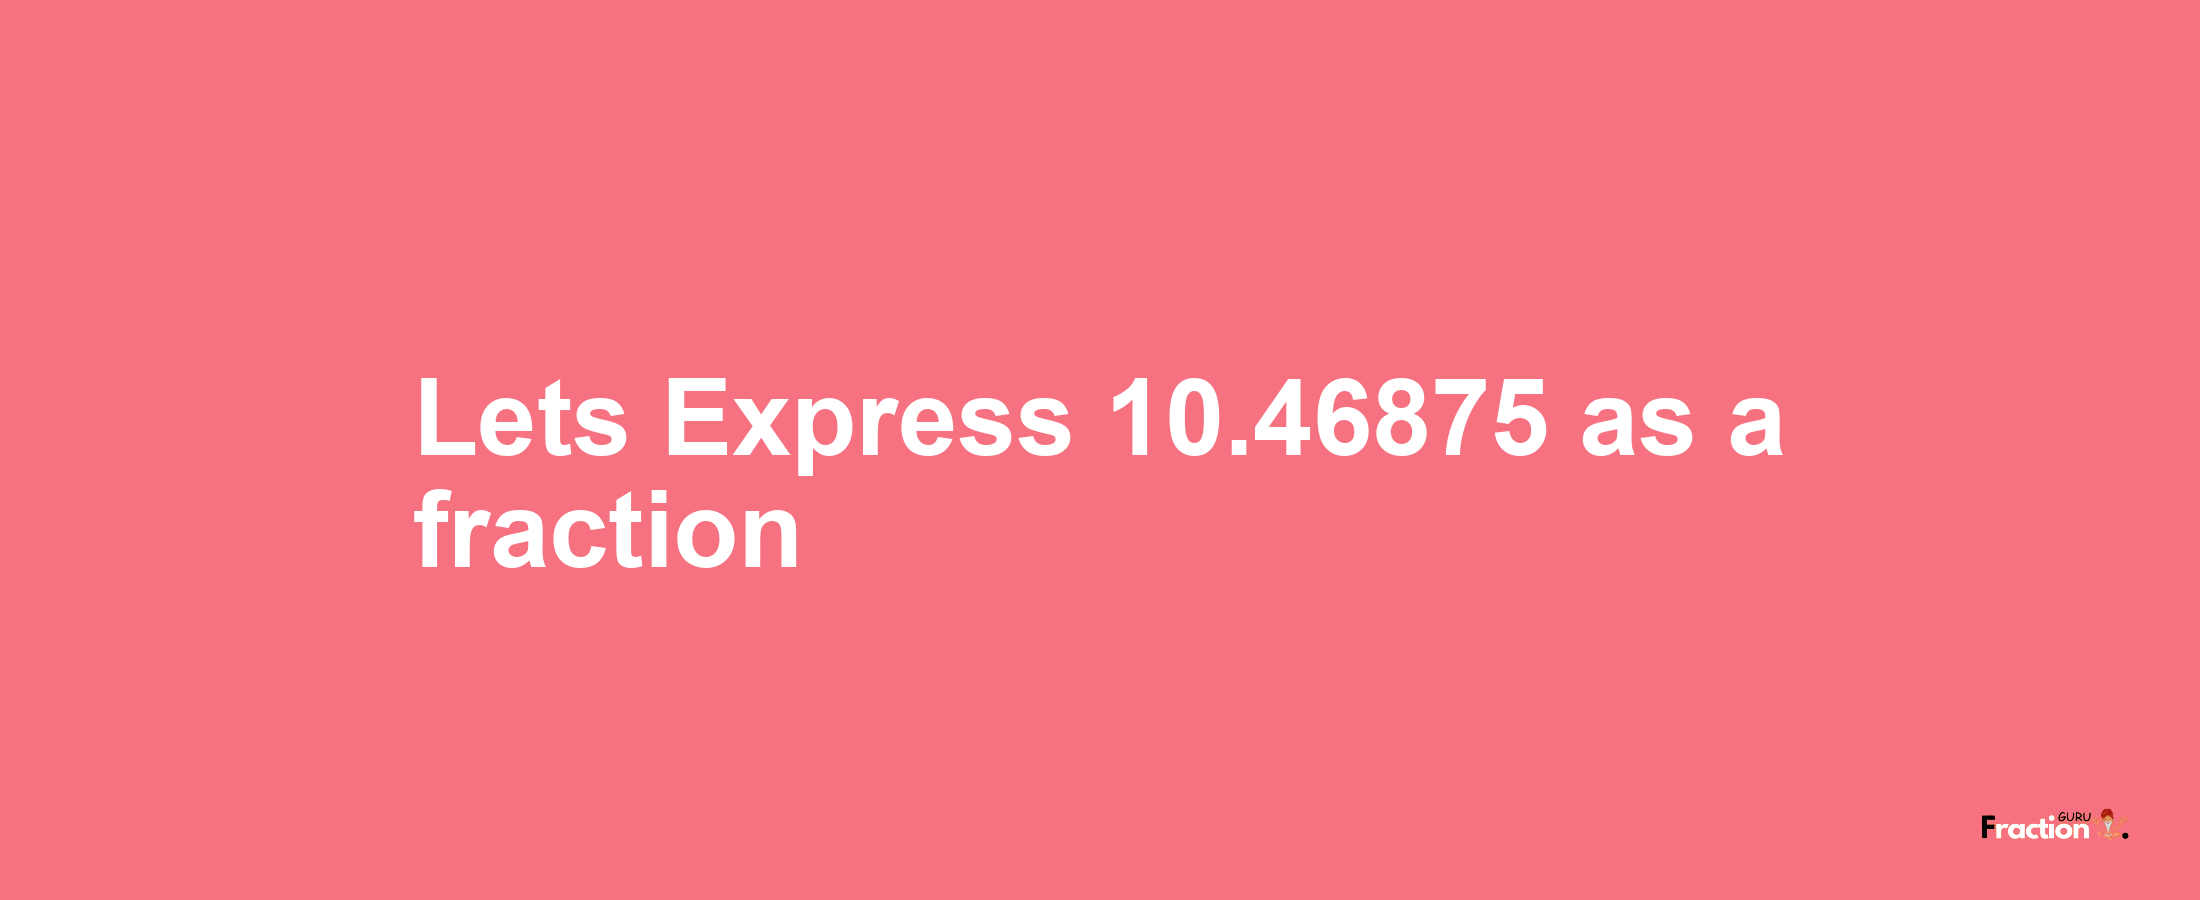 Lets Express 10.46875 as afraction